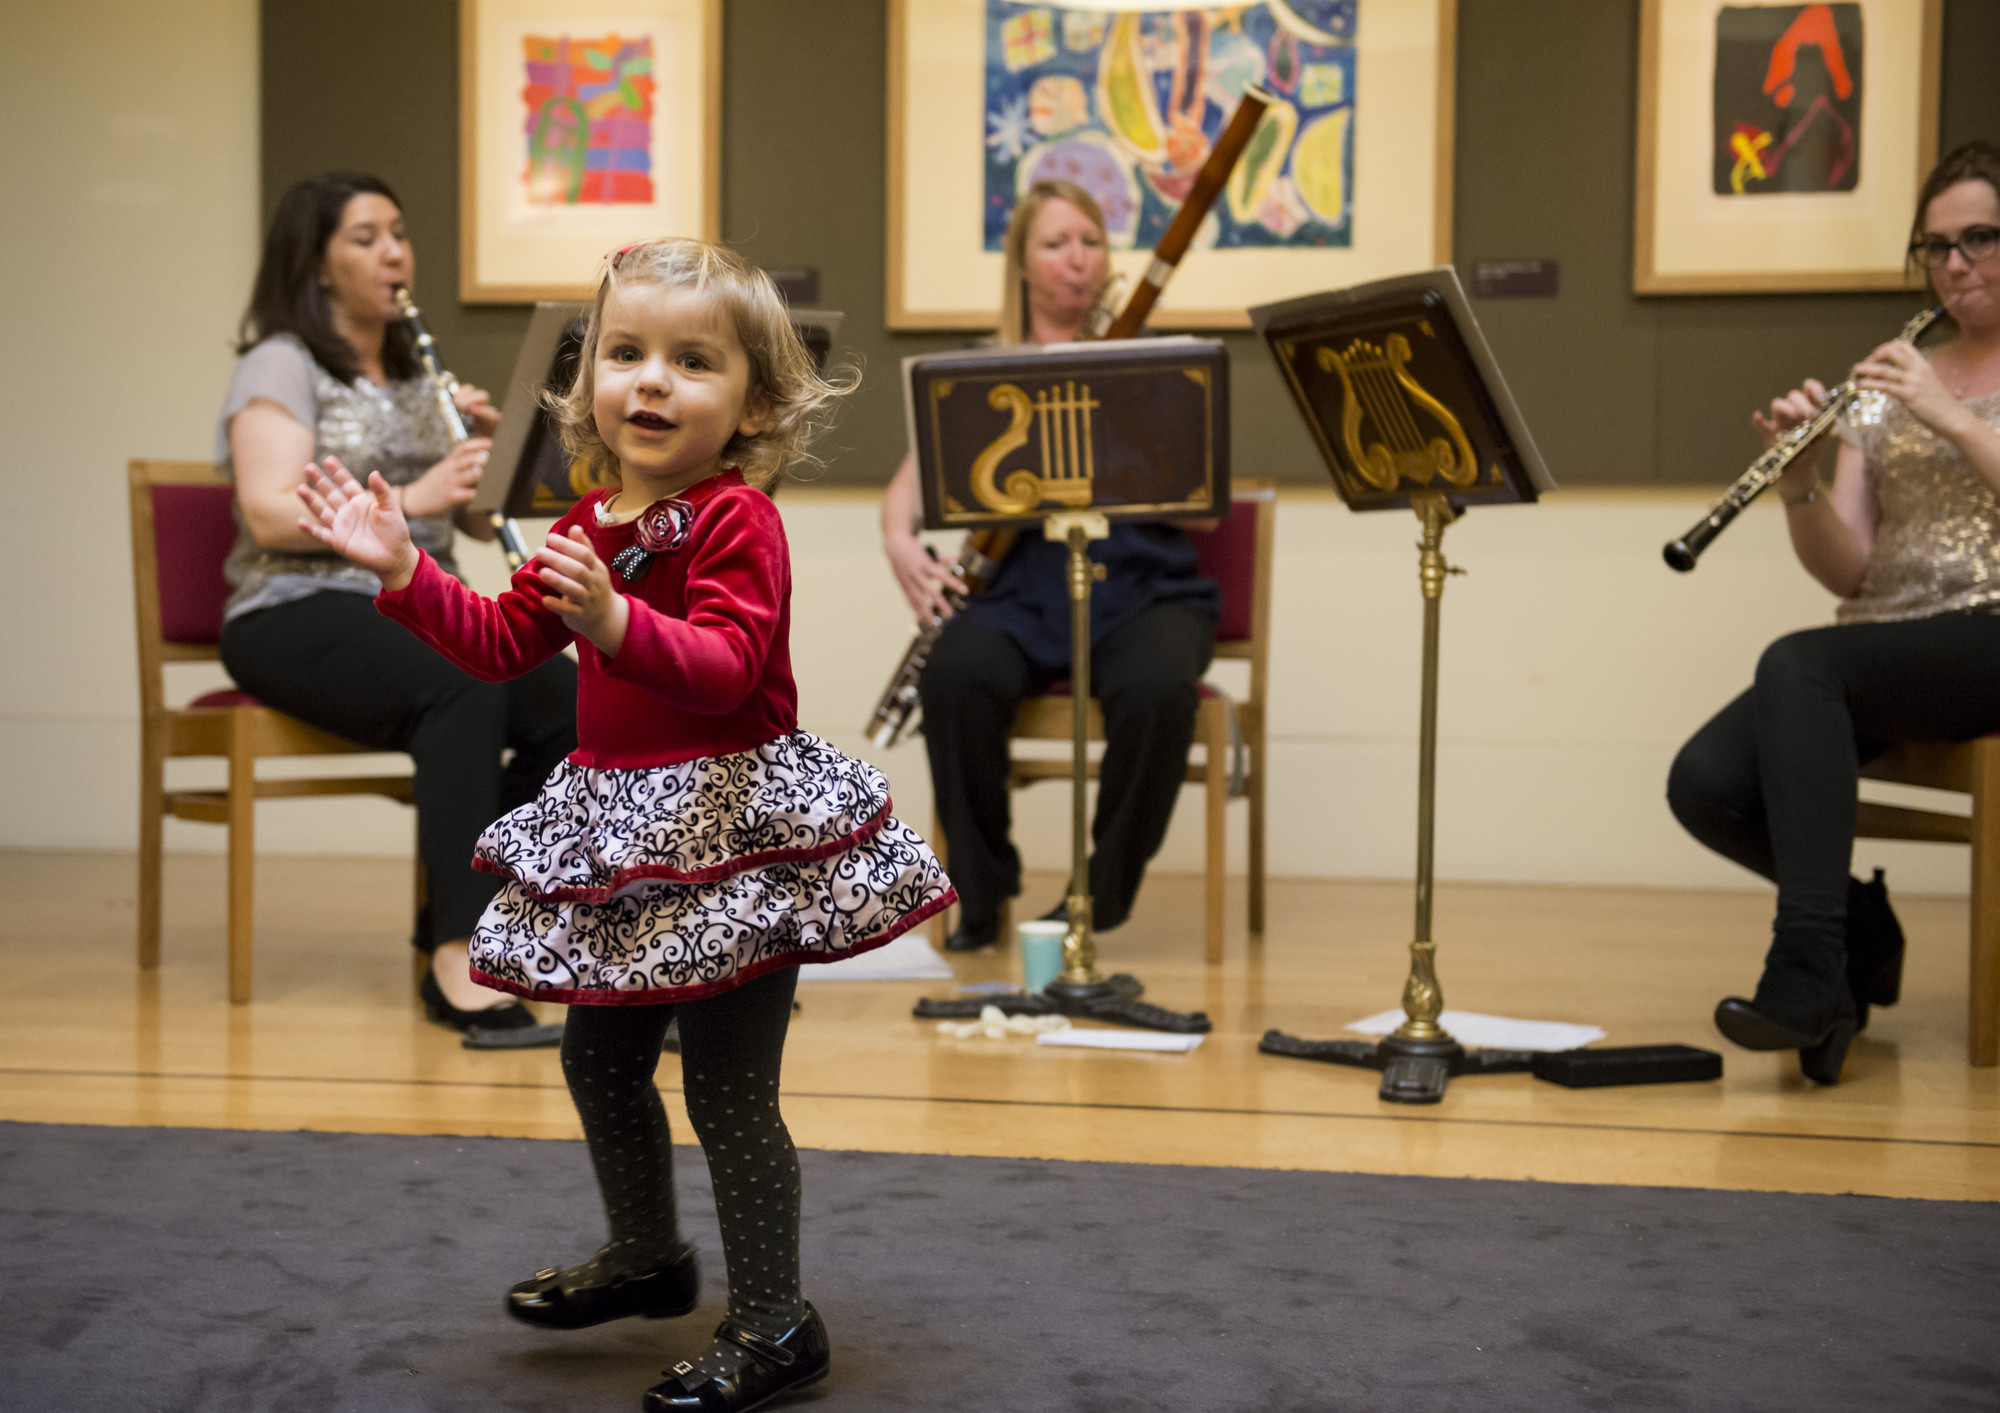 A little girl is dancing in front of classical musicians